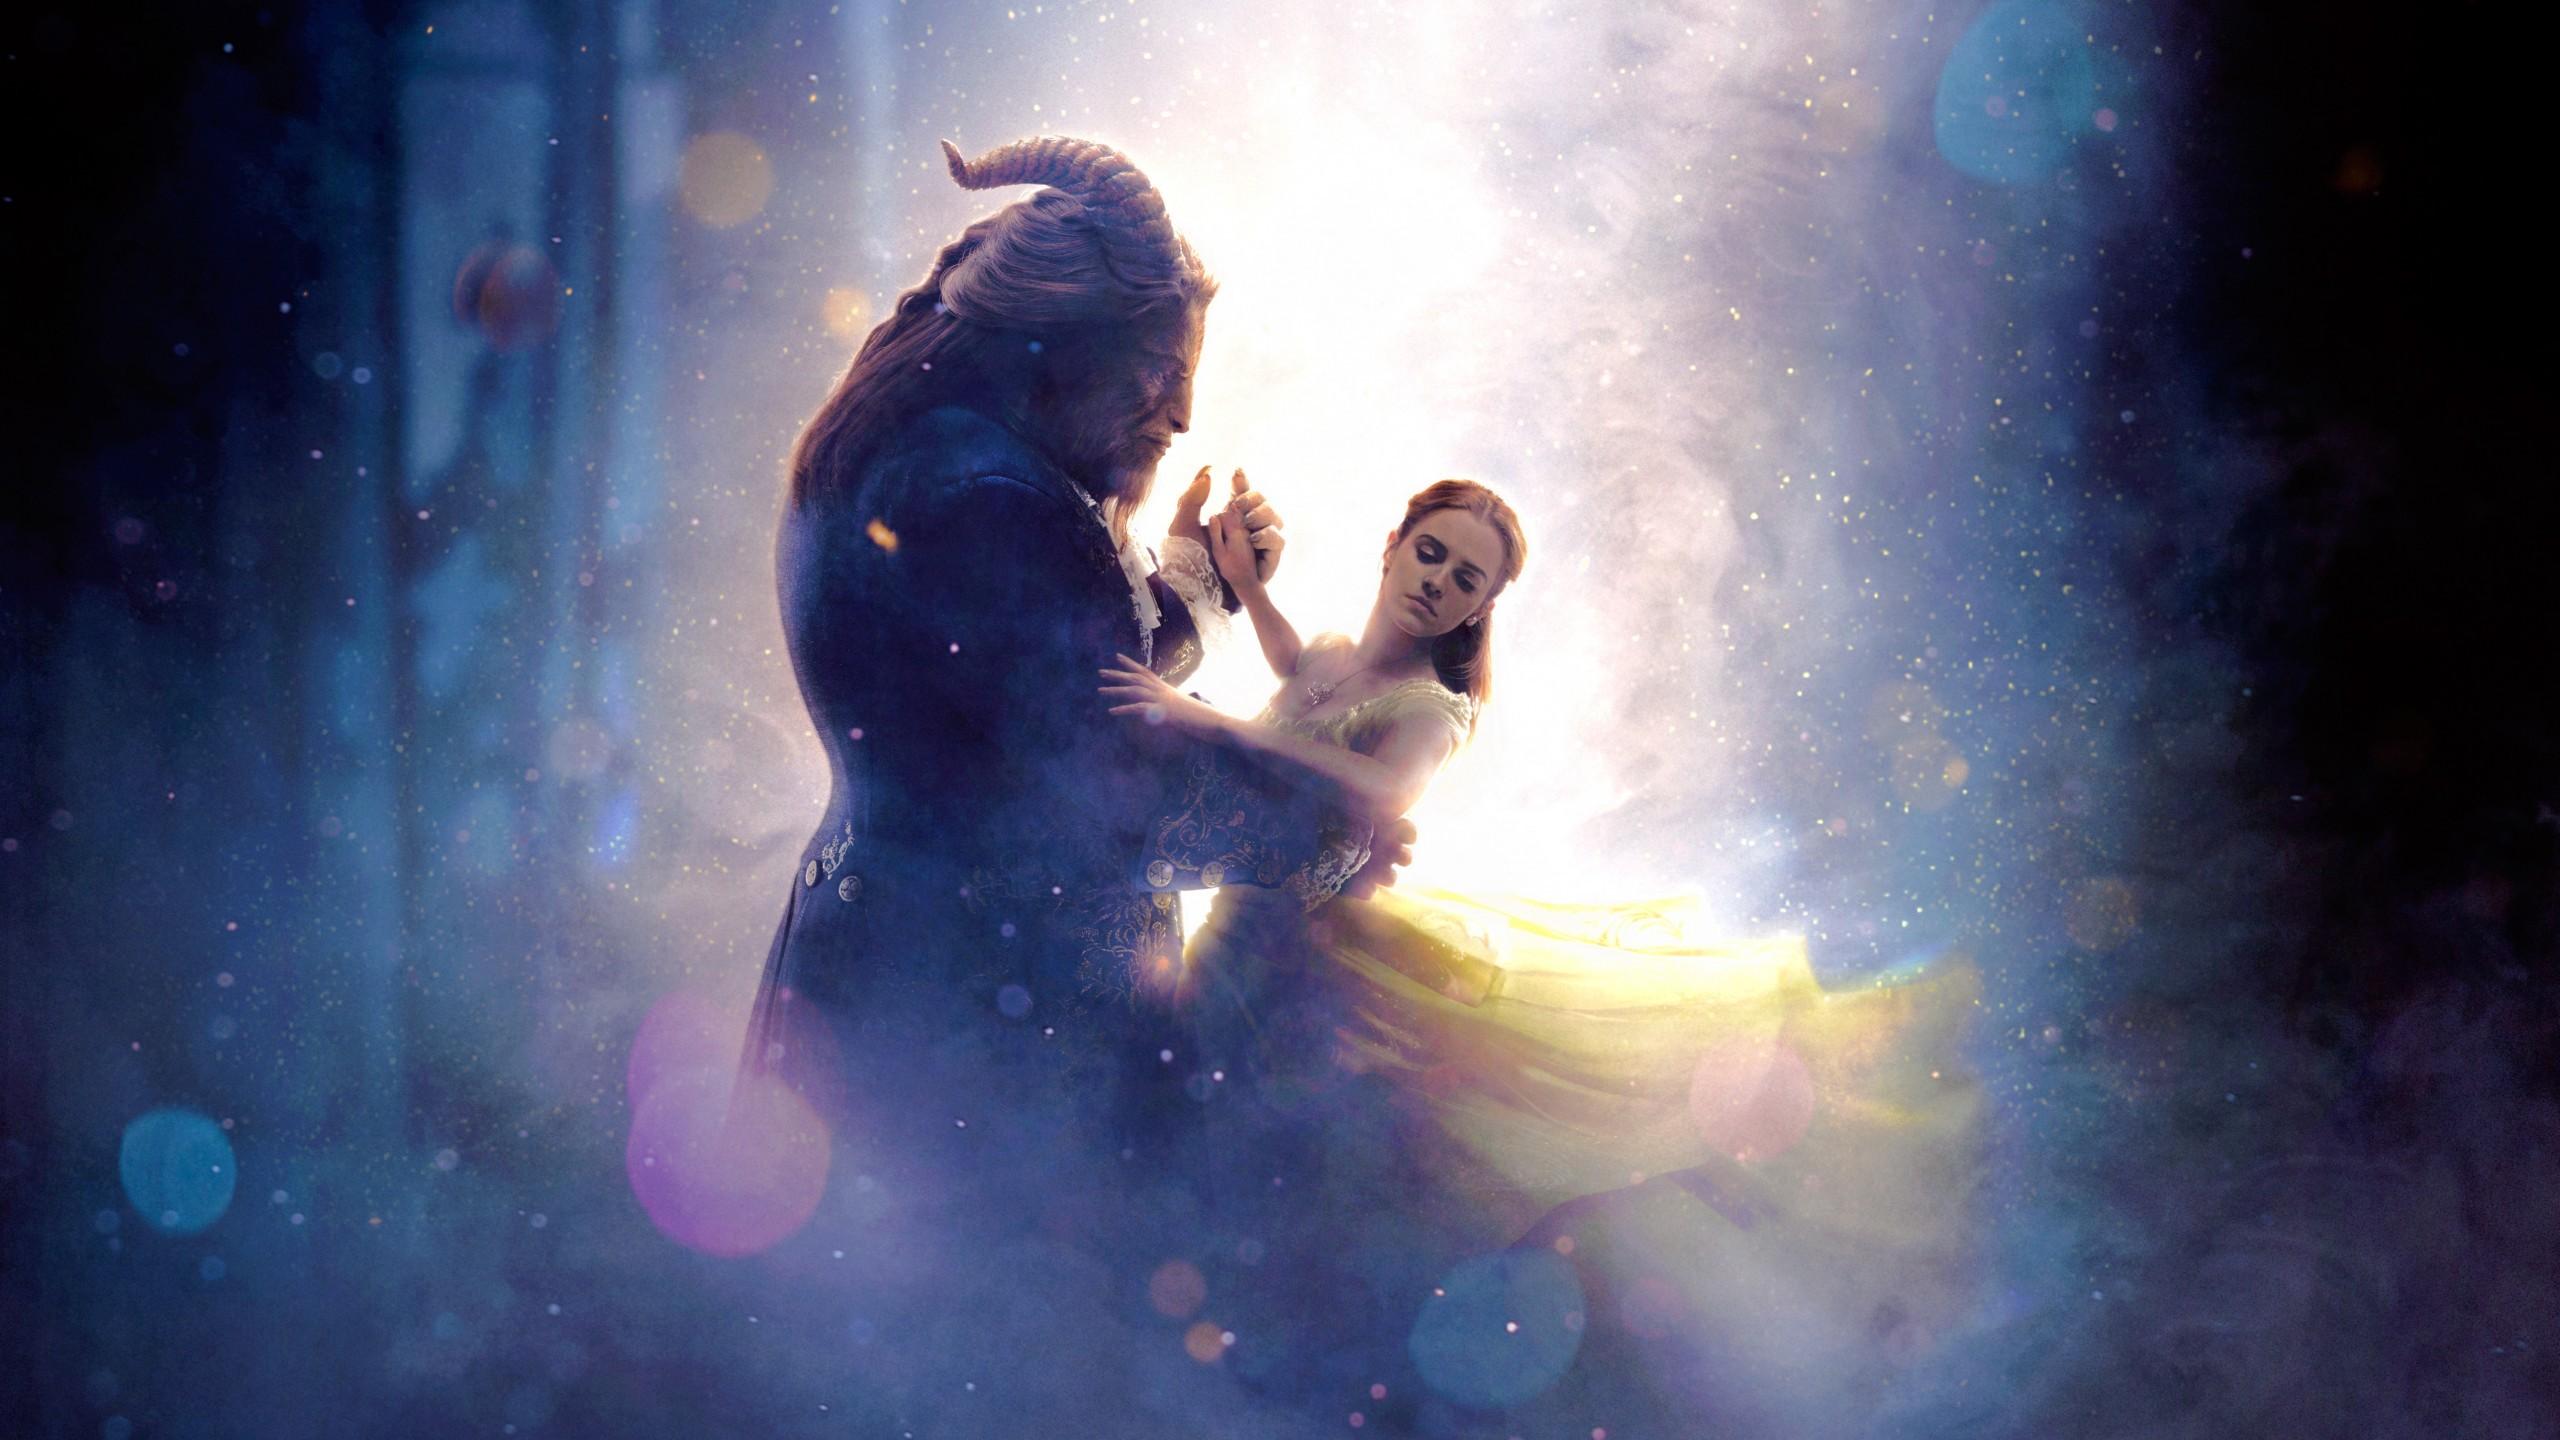 Beauty and the Beast 2018 HD Wallpaper